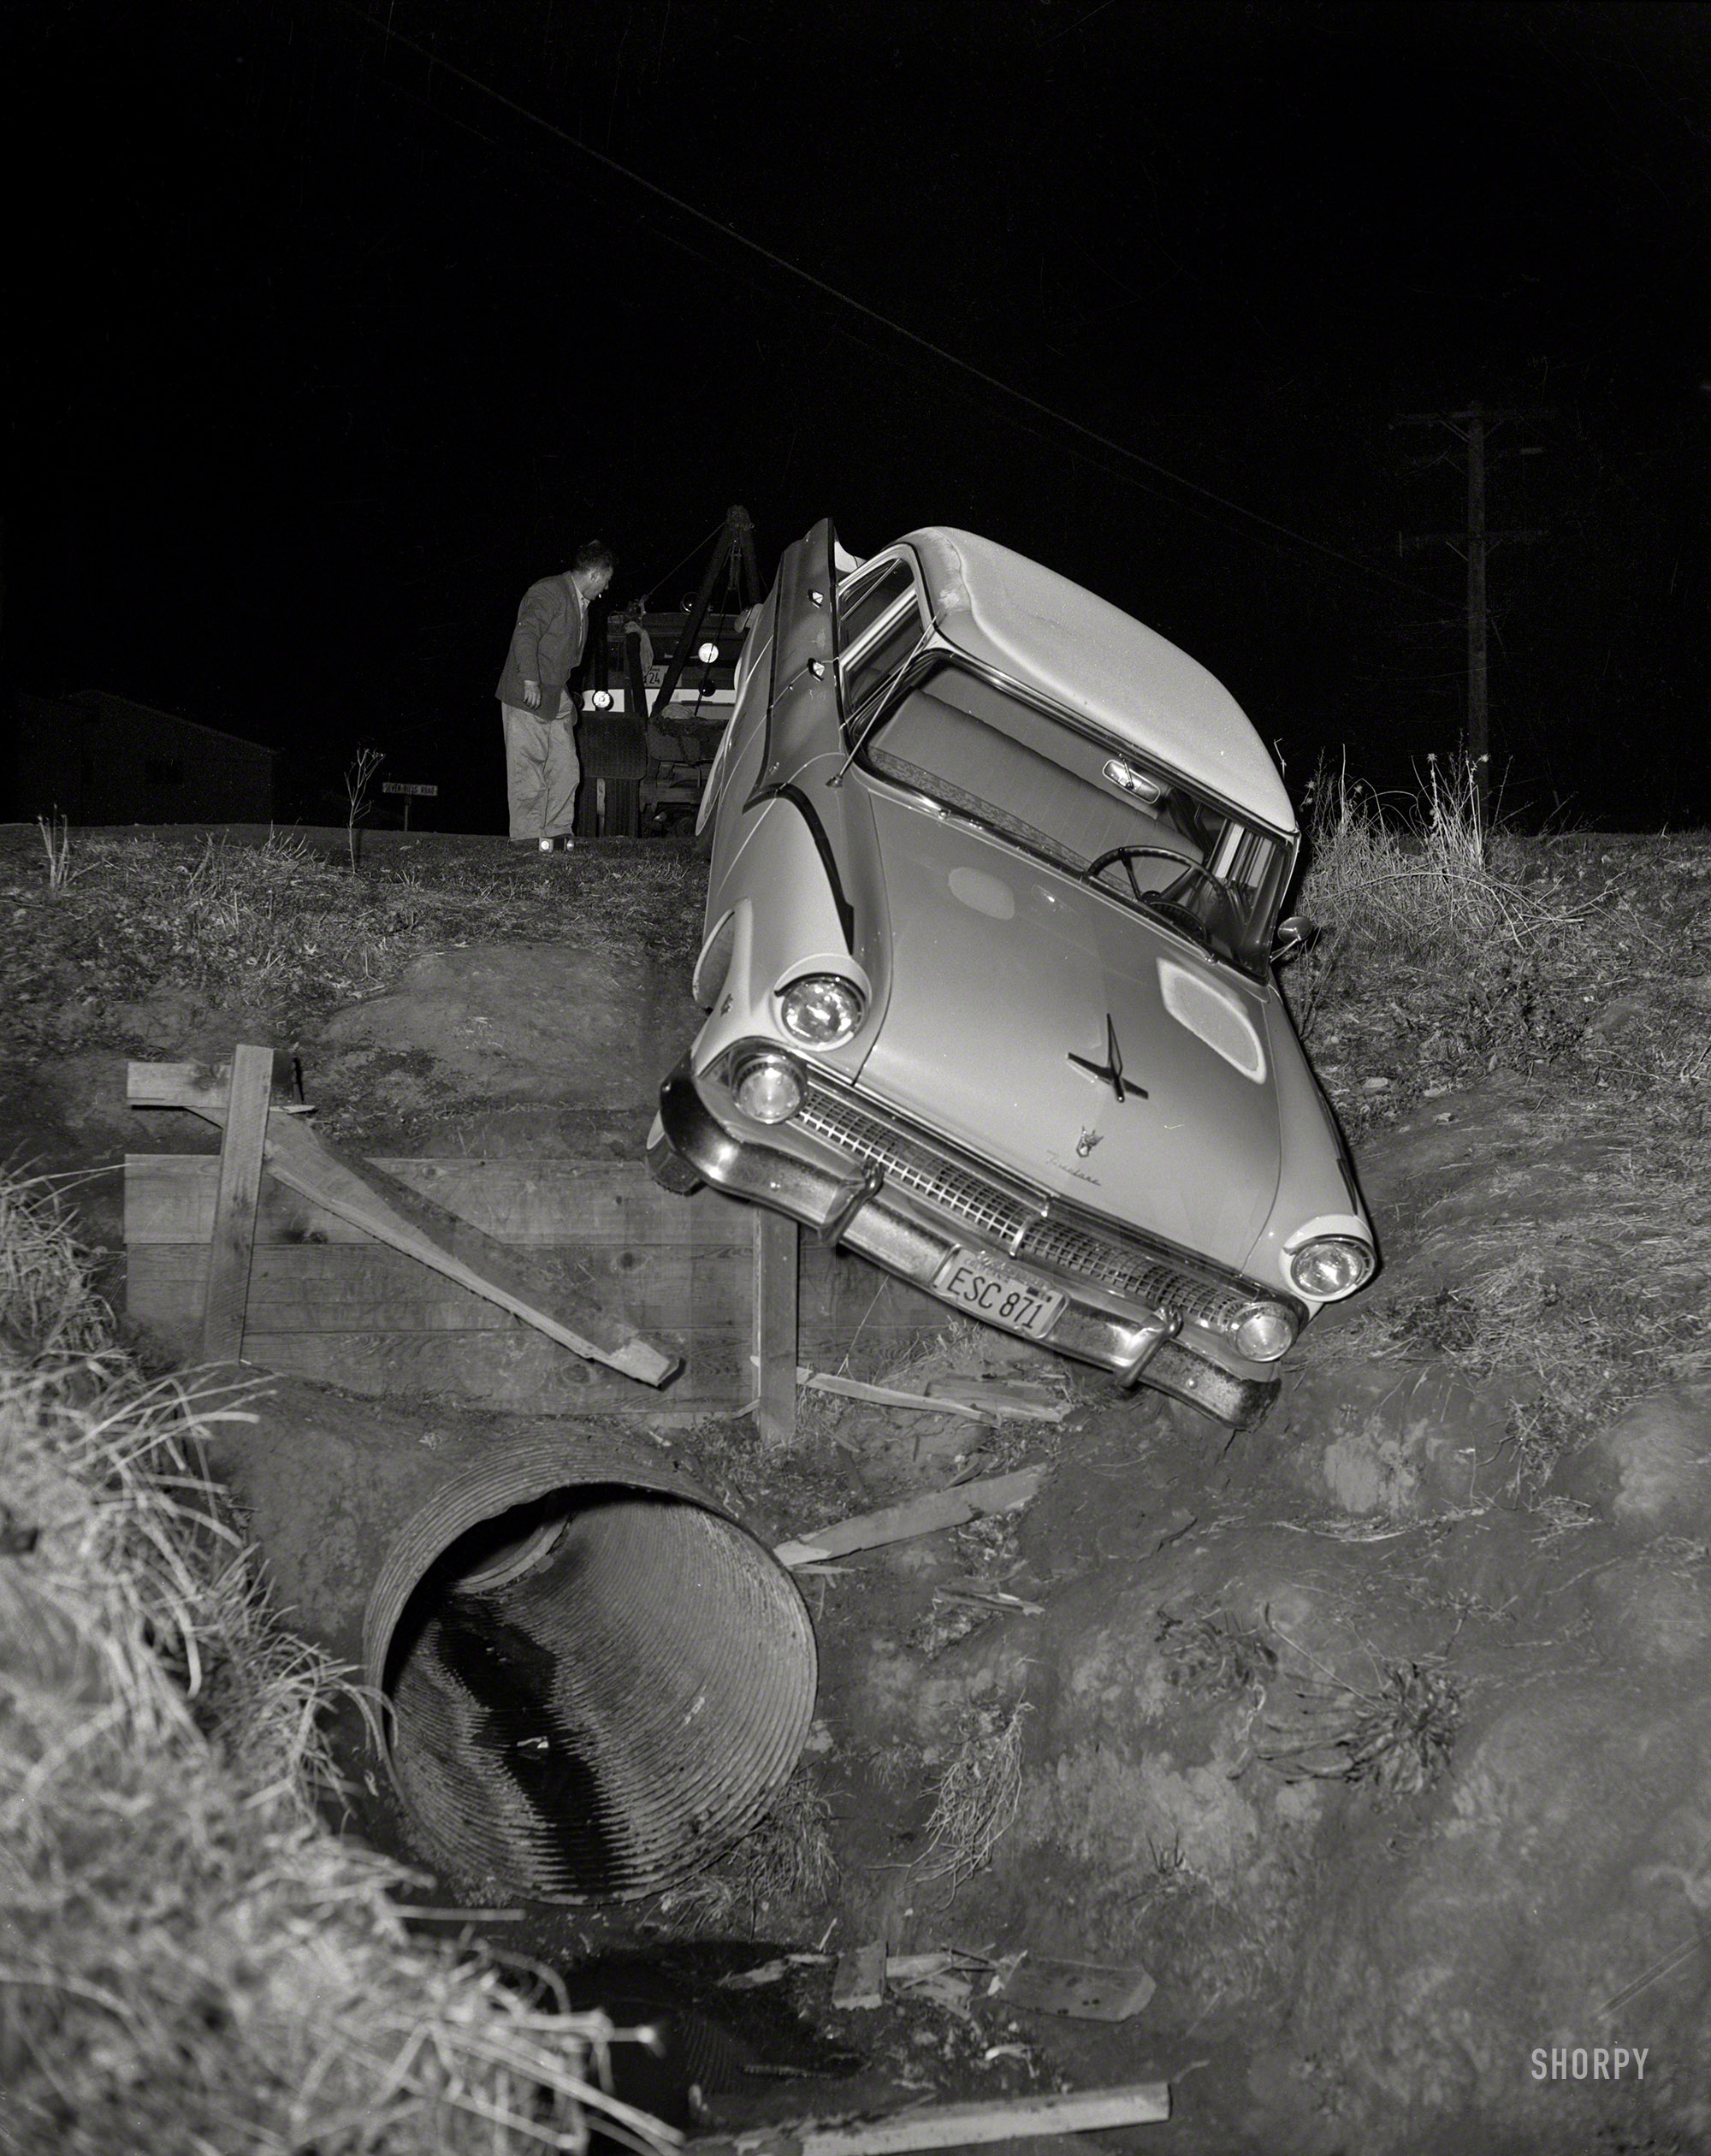 Castro Valley, Calif., circa 1958. "Accident, Seven Hills Road." One sunburned '55 Ford Fairlane, saved. 4x5 acetate negative from the News Archive. View full size.